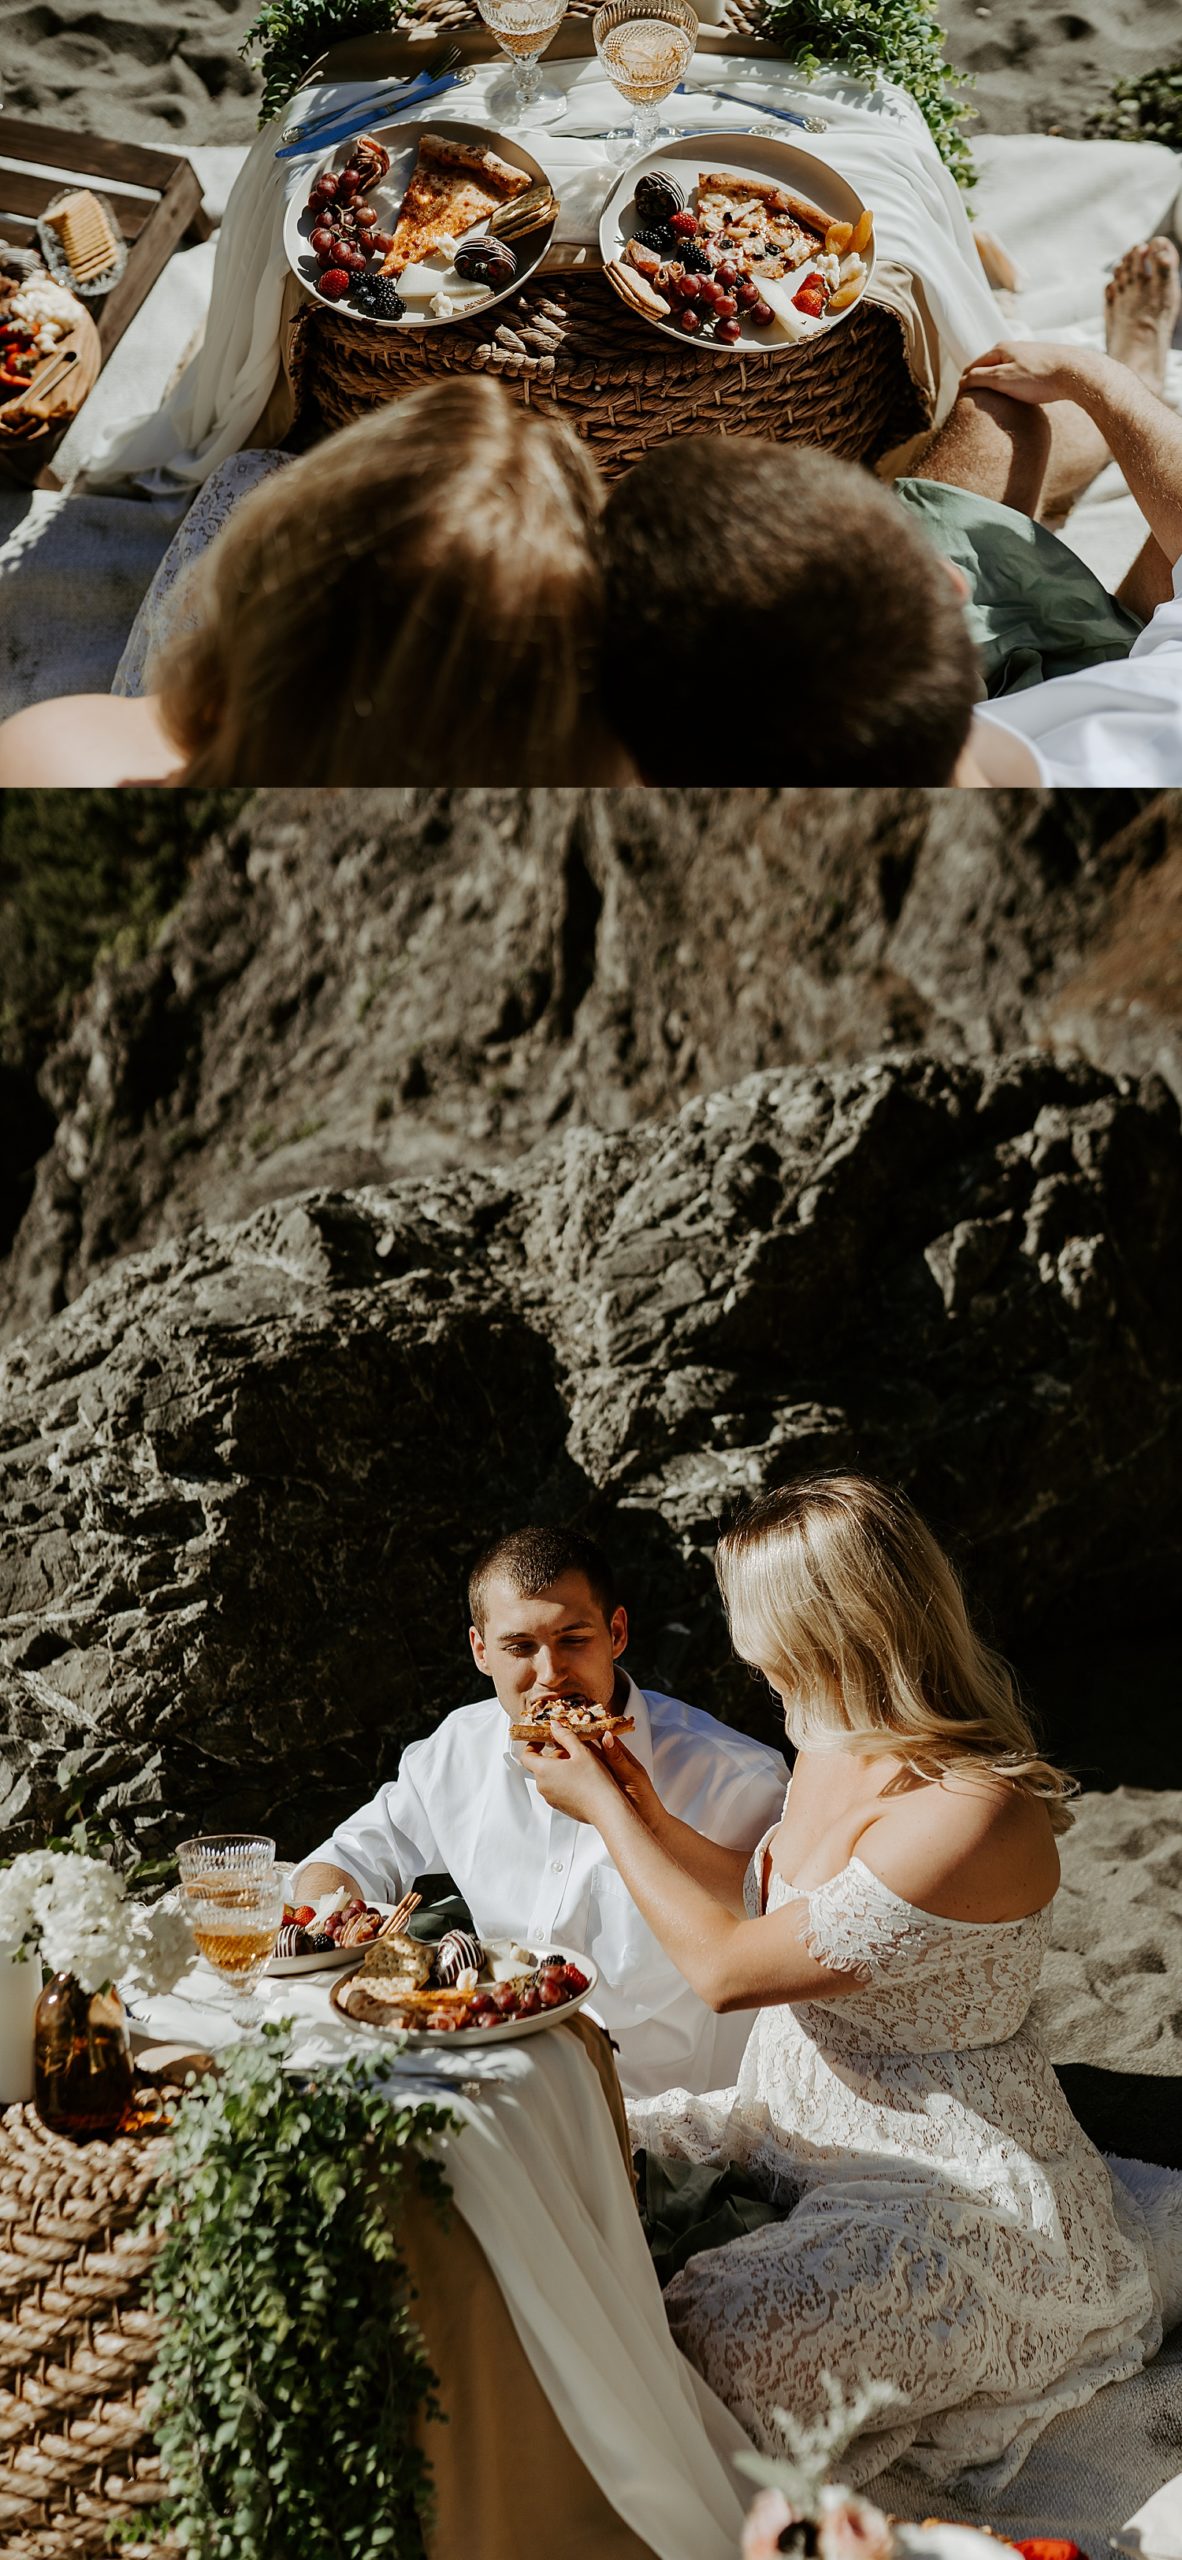 Beach elopement picnic with pizza and charcuterie